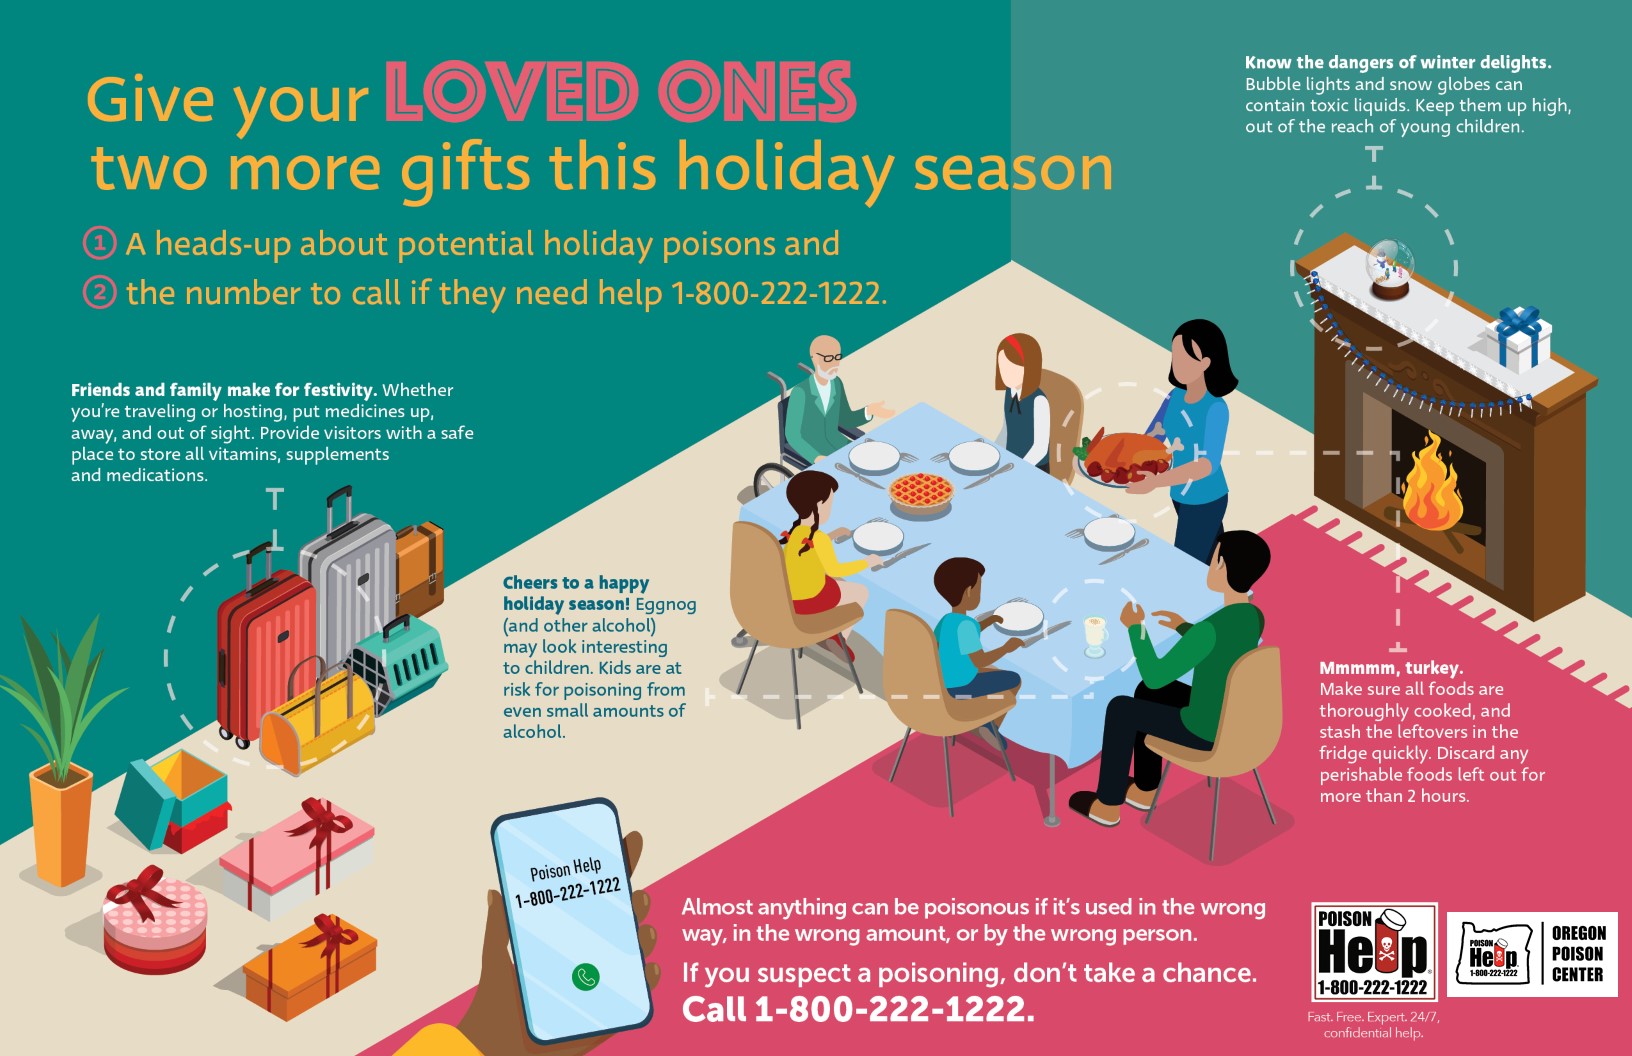 Holiday hazards are all around us. Be prepared by keeping the poison center number handy: 1-800-222-1222.